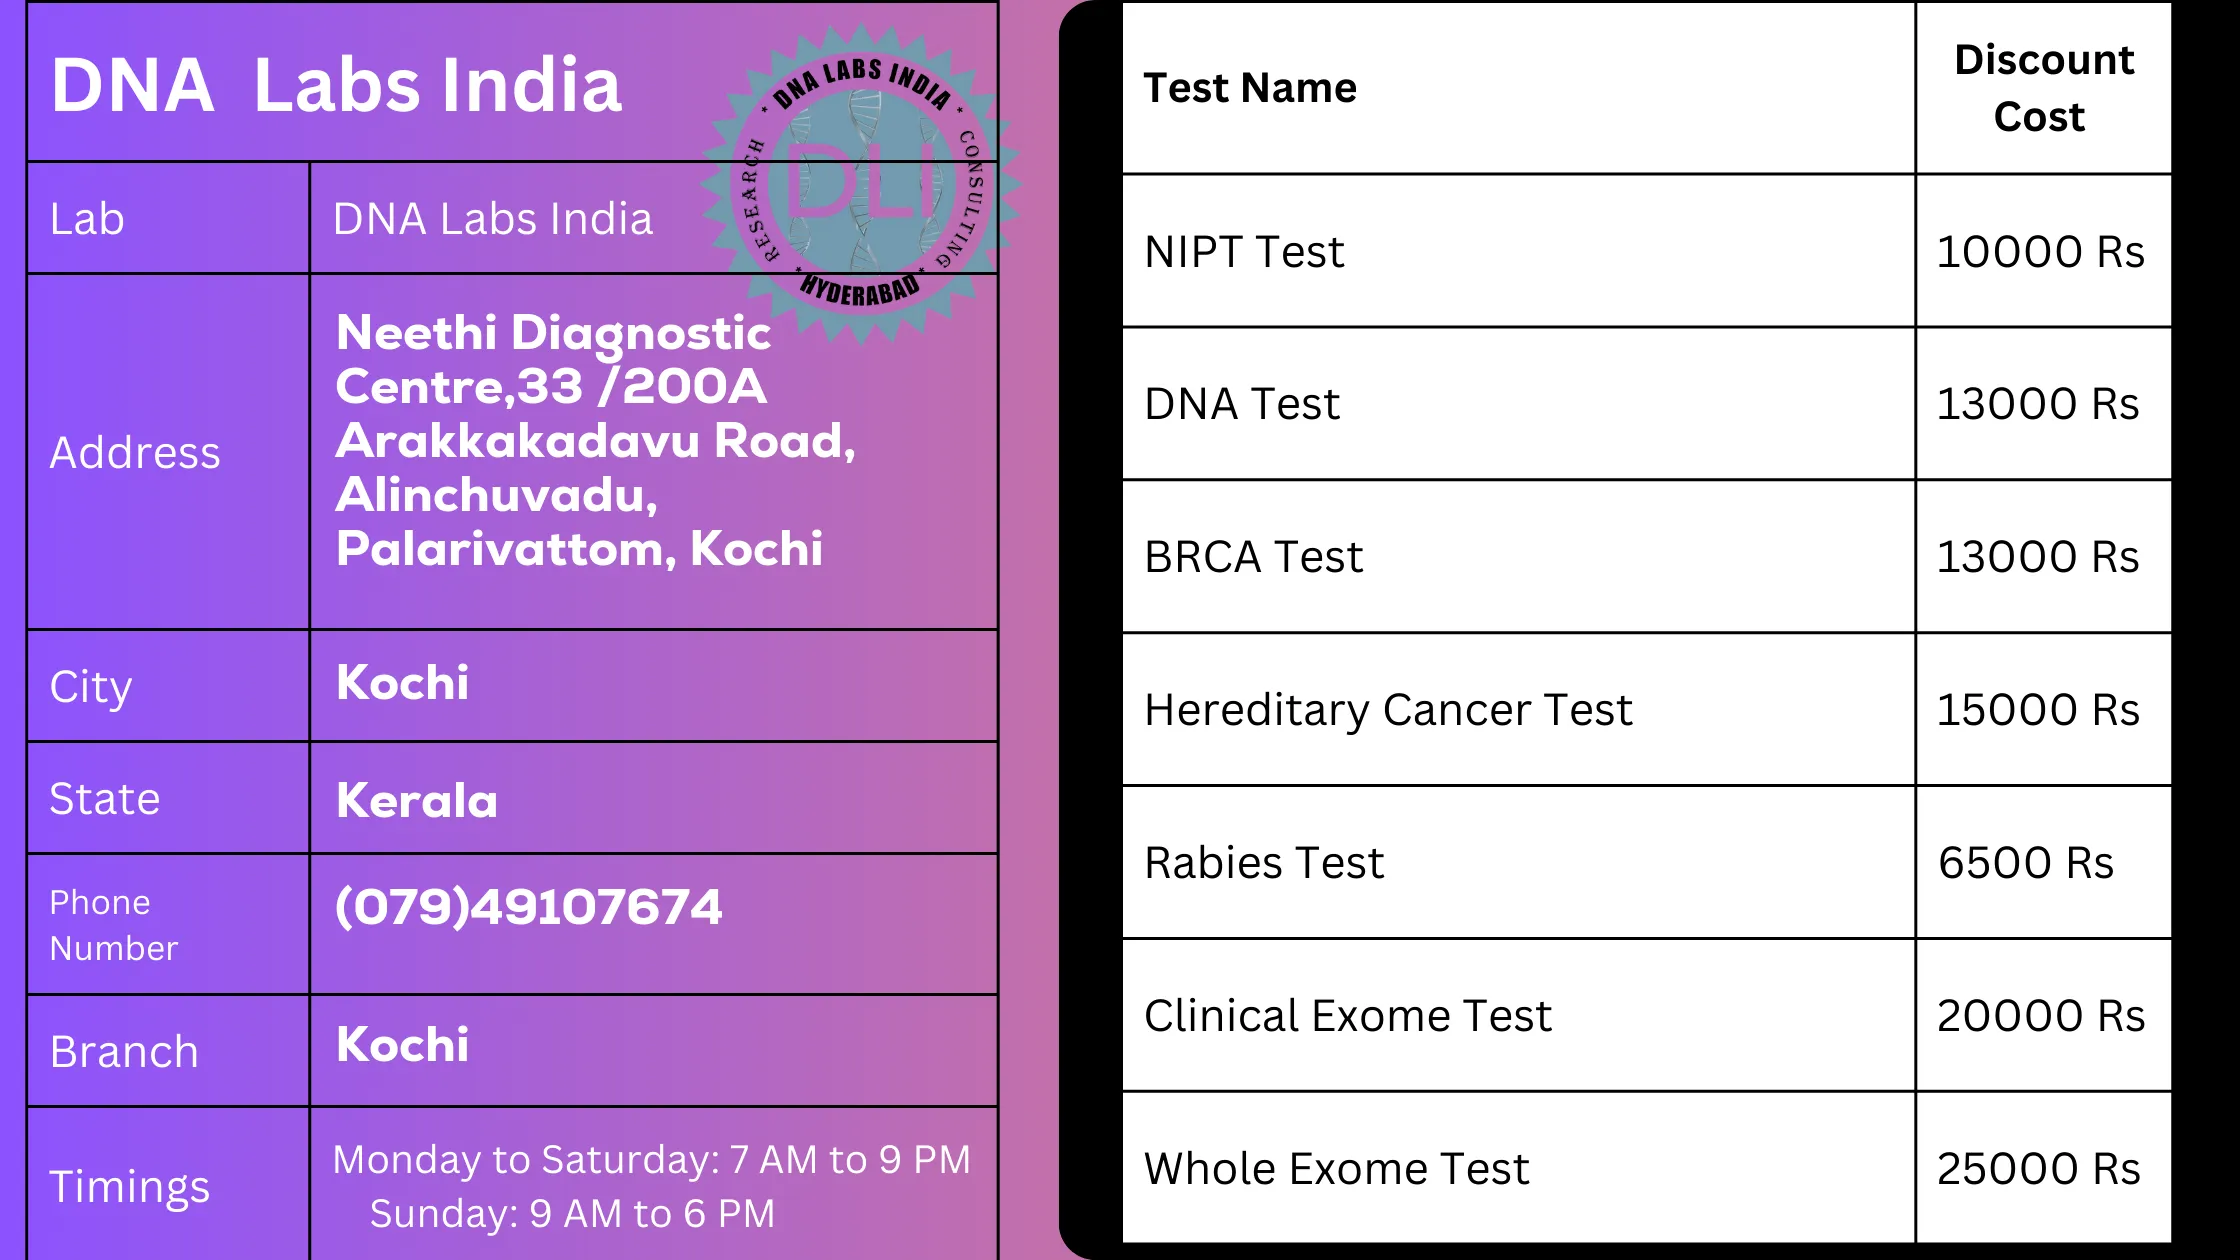 DNA Labs India - Top Genetic Testing Services in Kochi